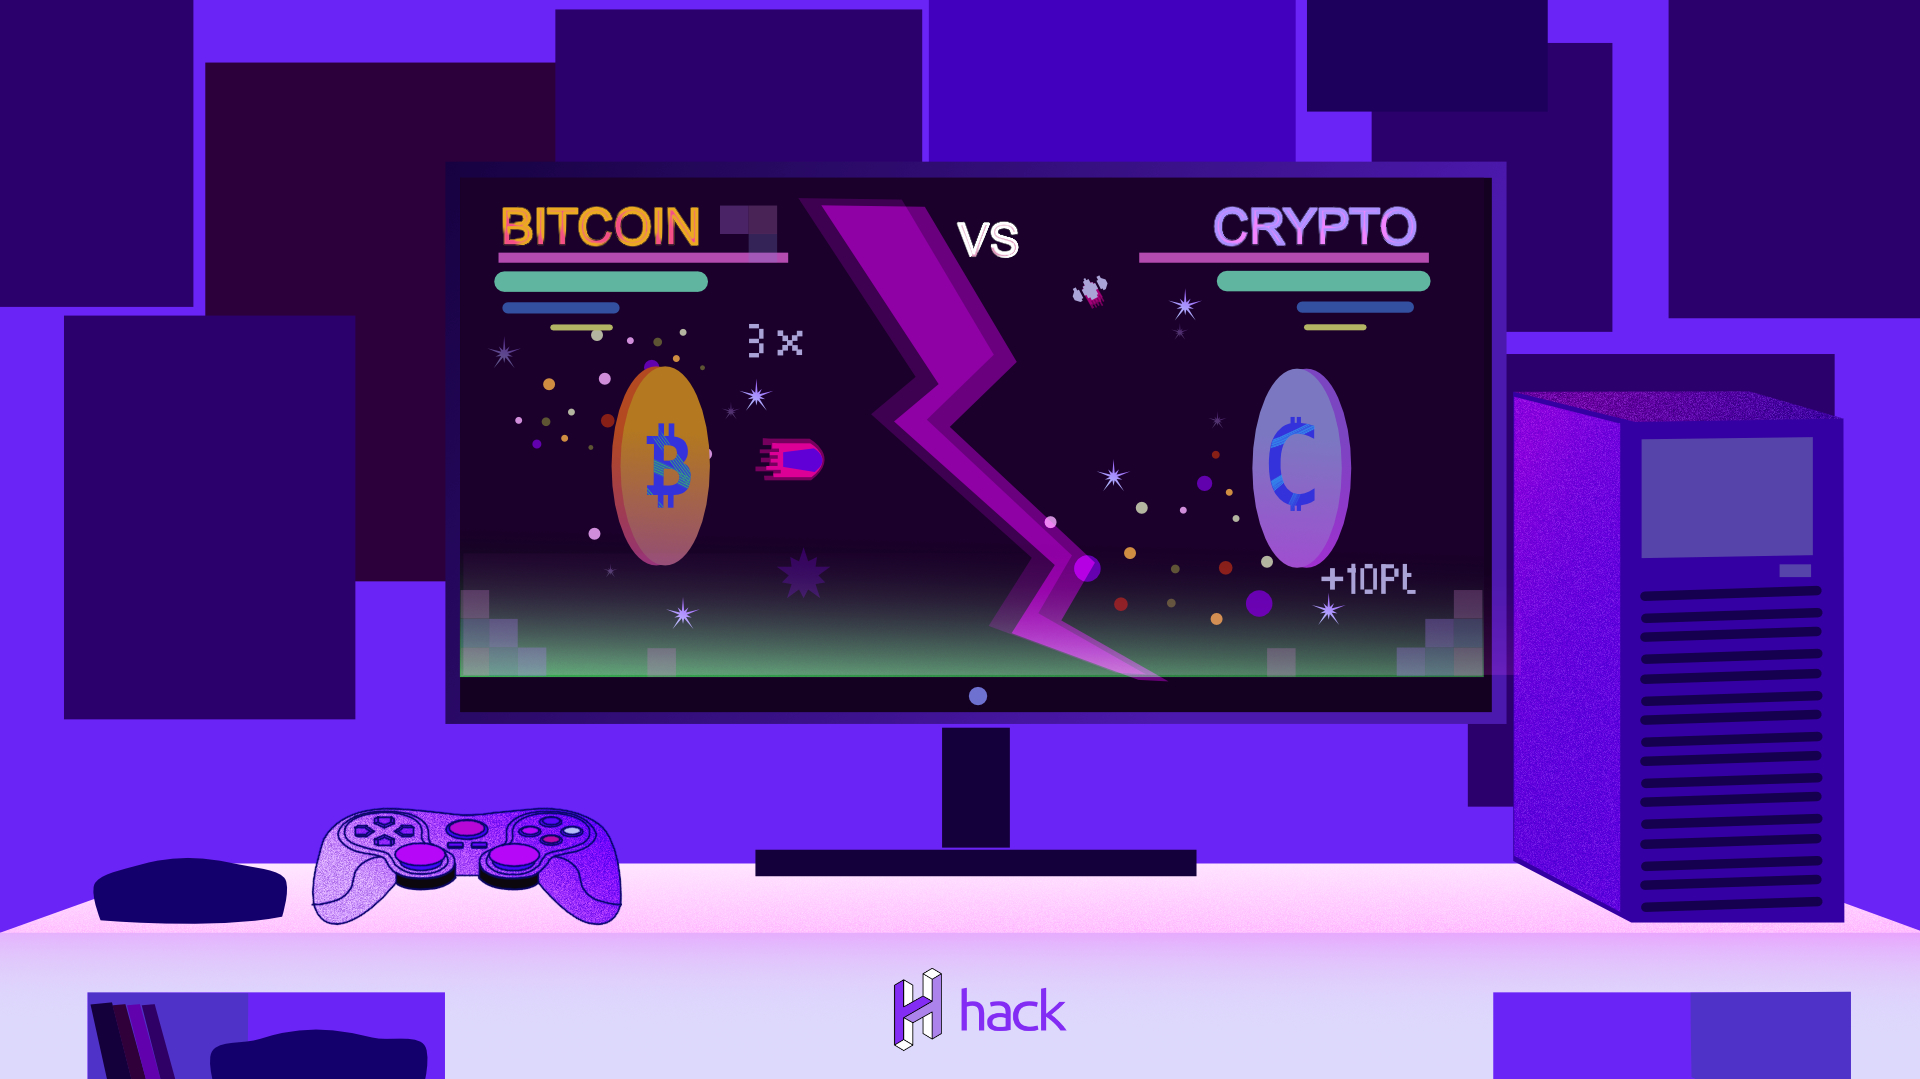 Bitcoin vs Crypto - What sets bitcoin apart from altcoins 1